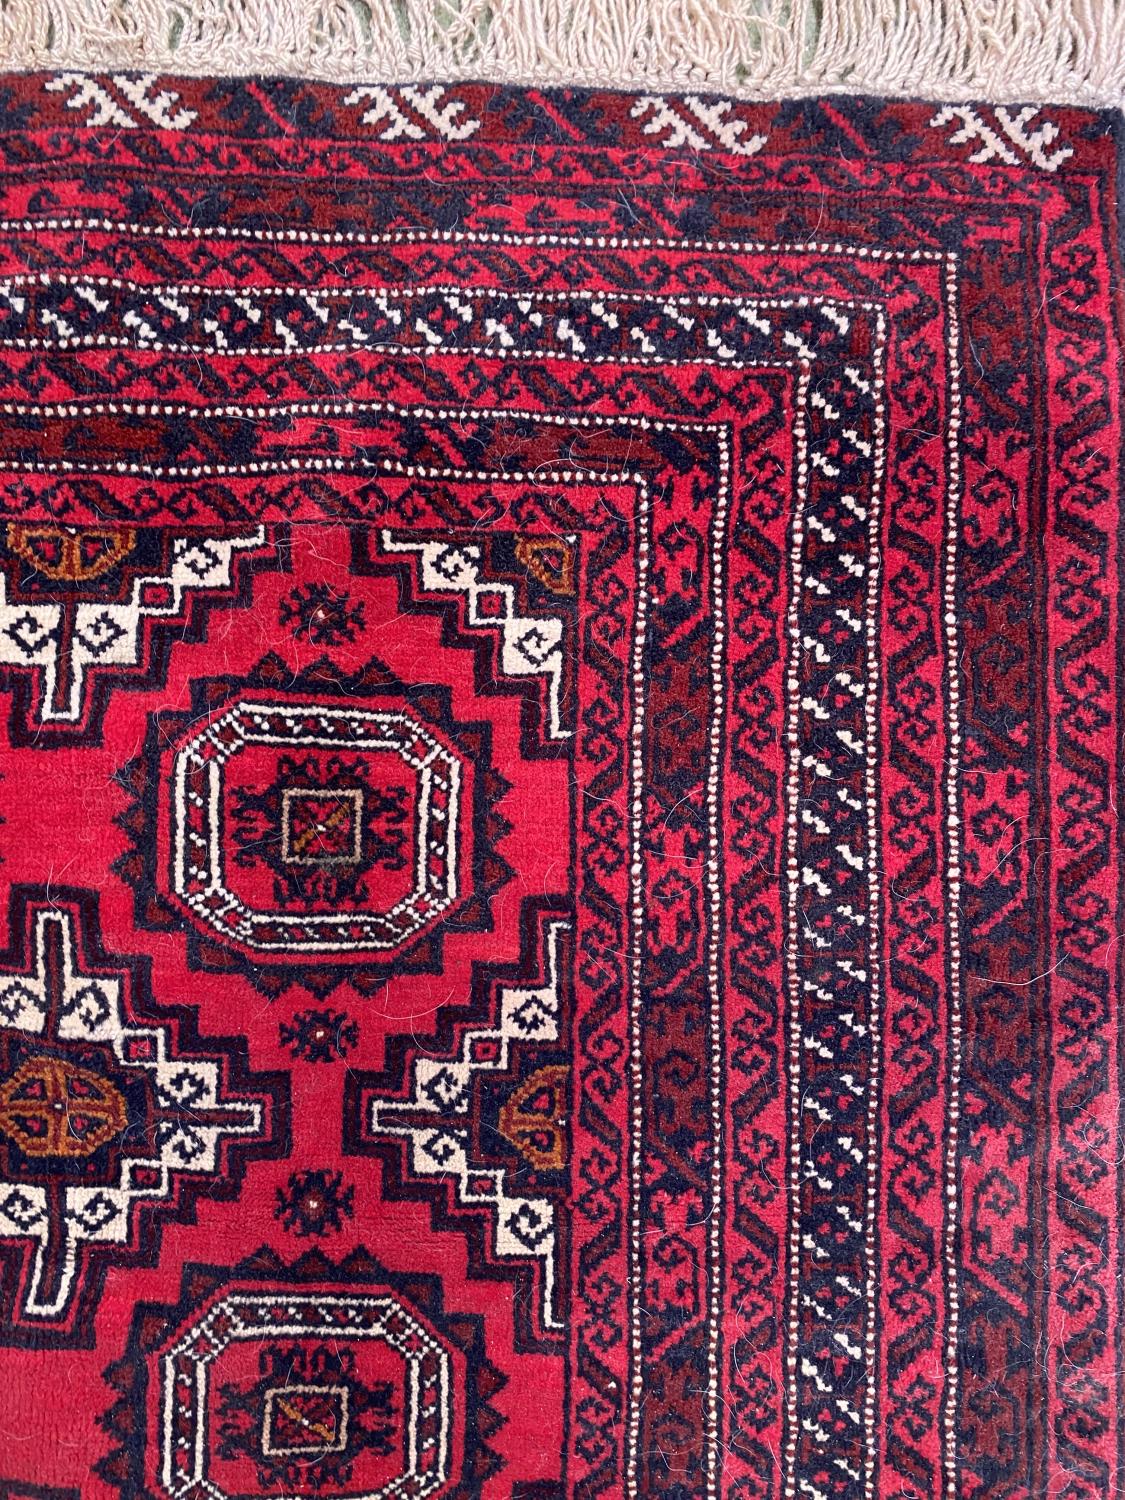 Red and brown oriental rug with brown and red borders, 123 x 175cm - Image 2 of 3